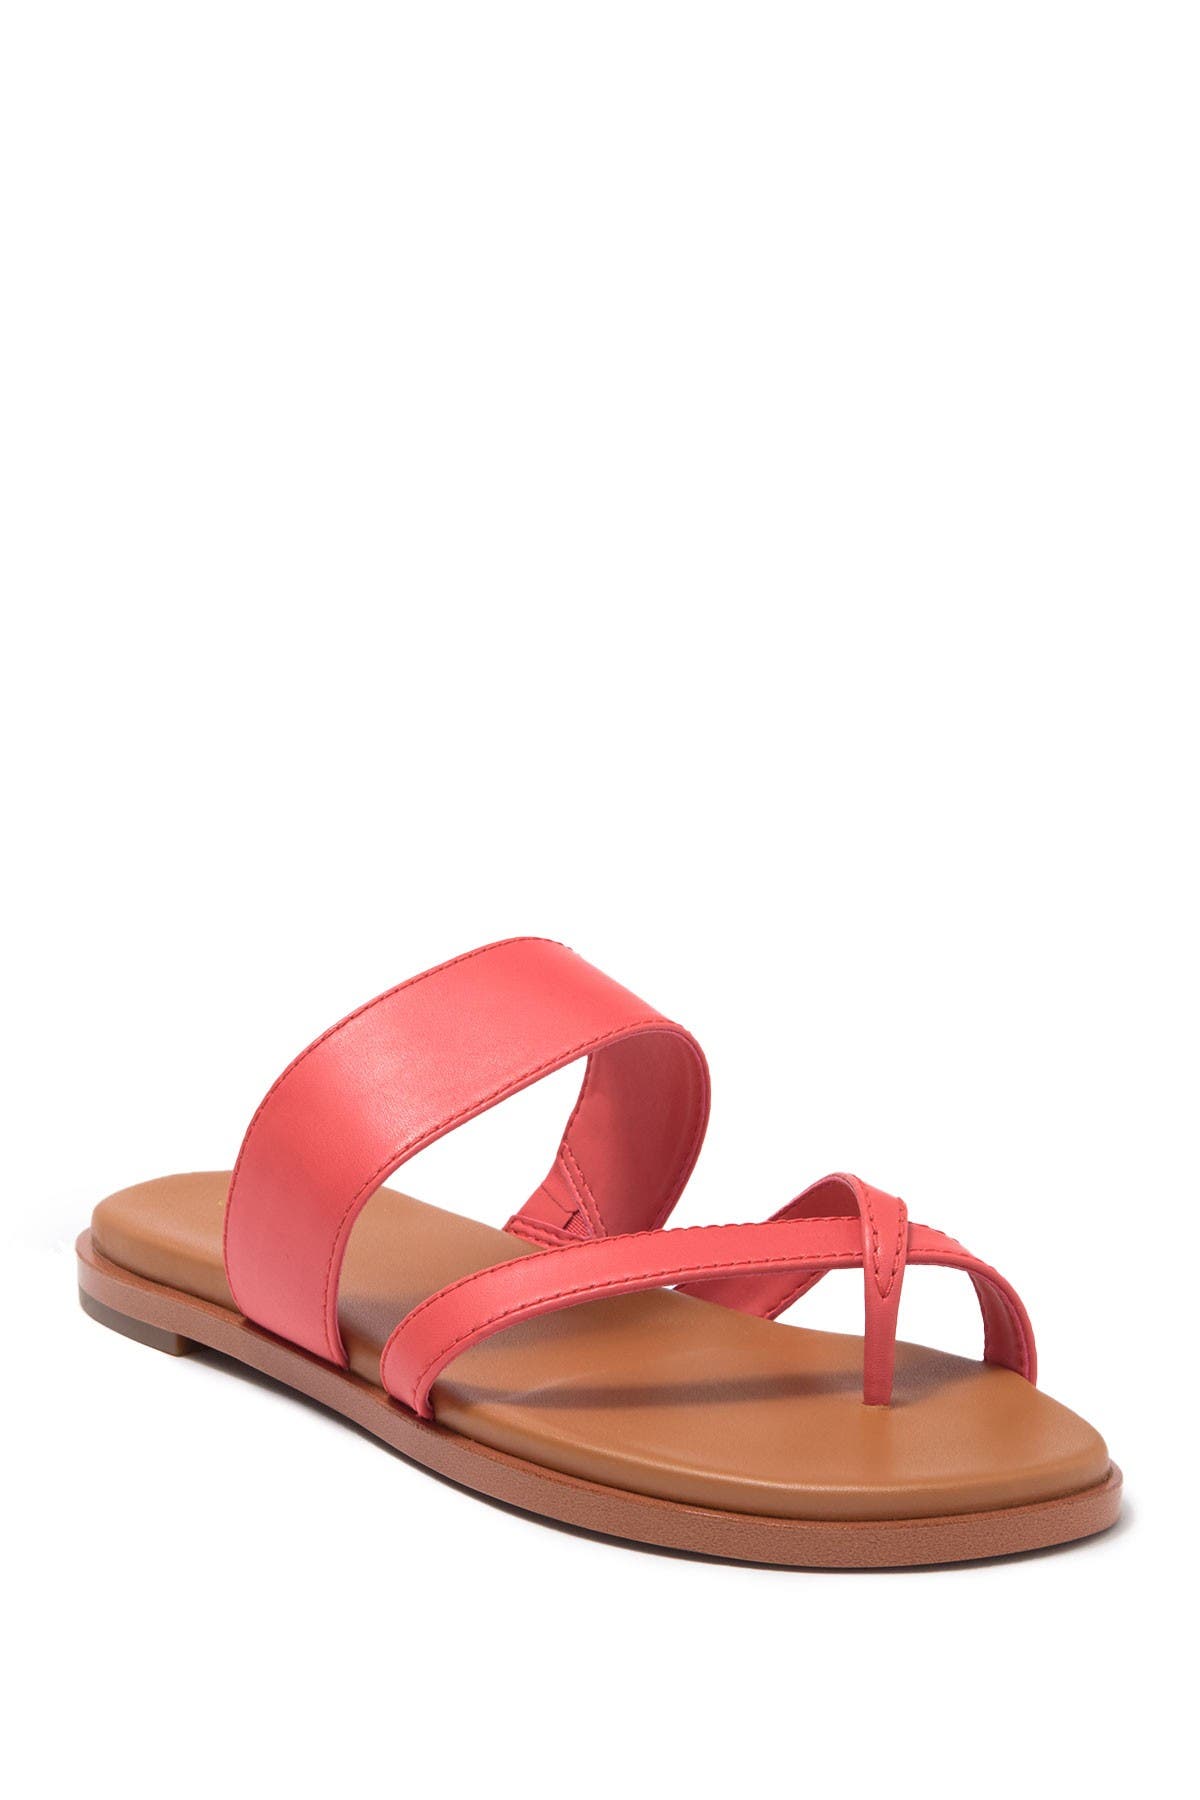 cole haan strappy sandals